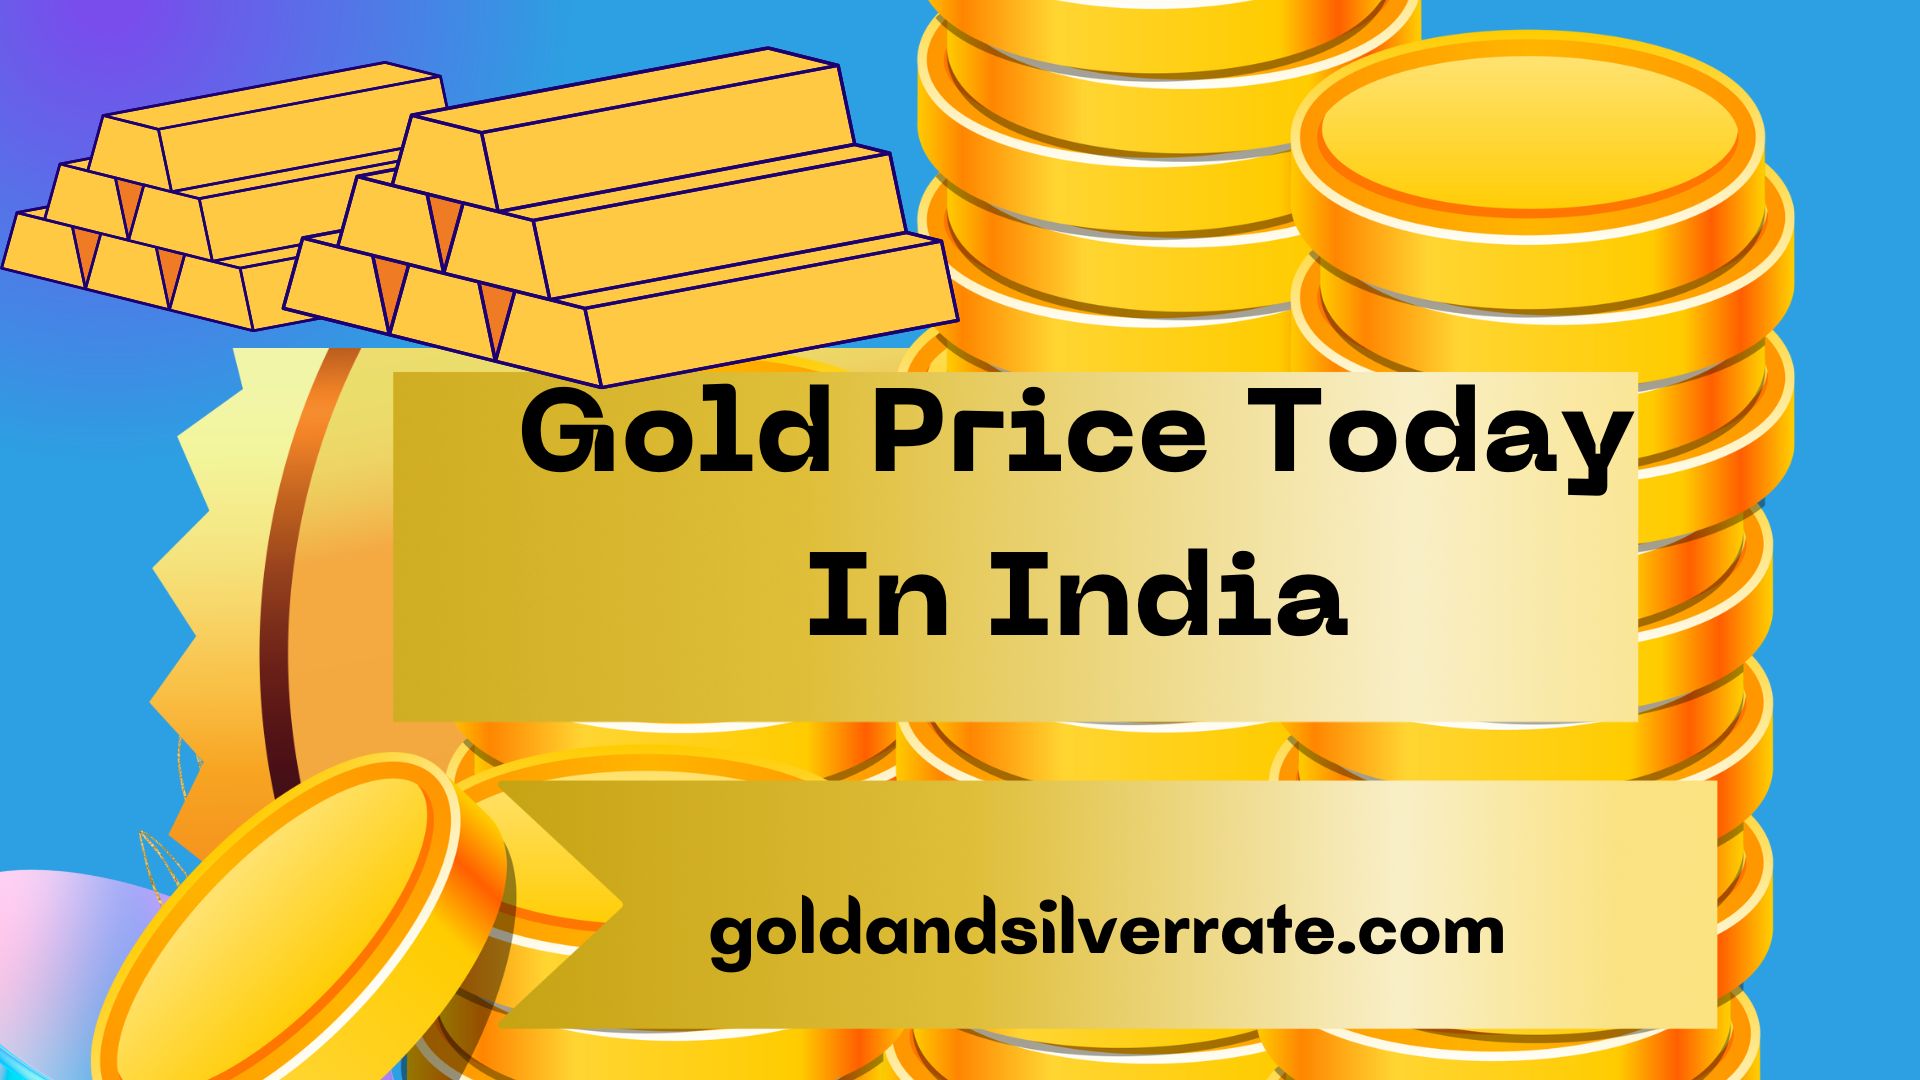 GOLD PRICE TODAY IN INDIA